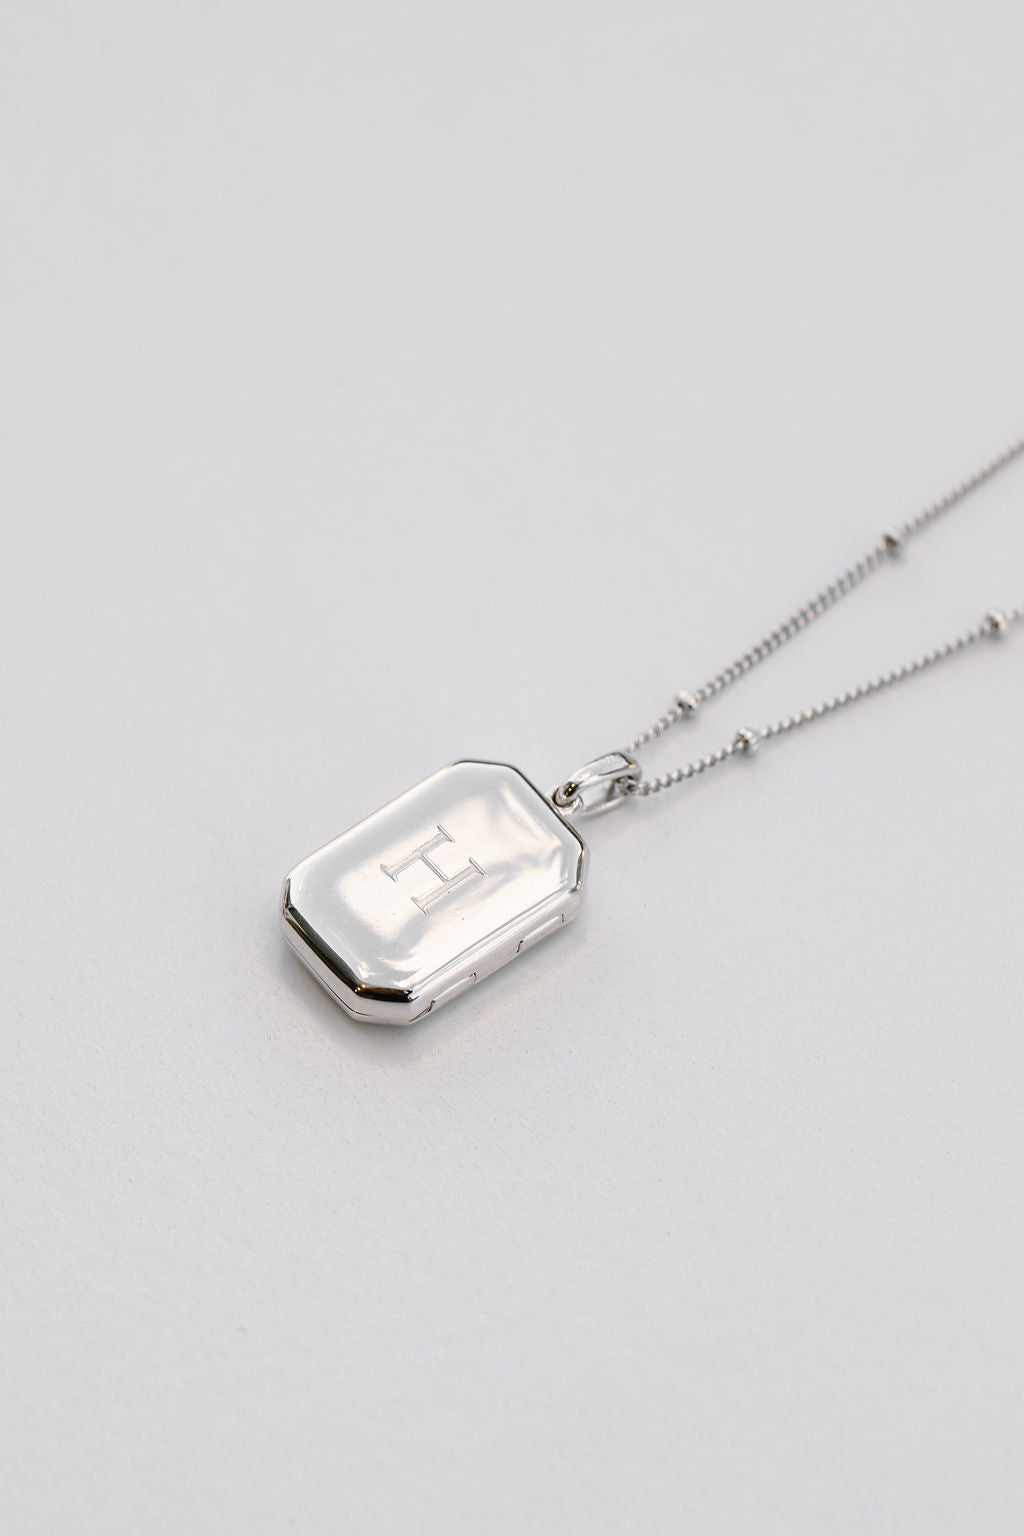 silver rectangular bevel locket engraved with a bead chain necklace